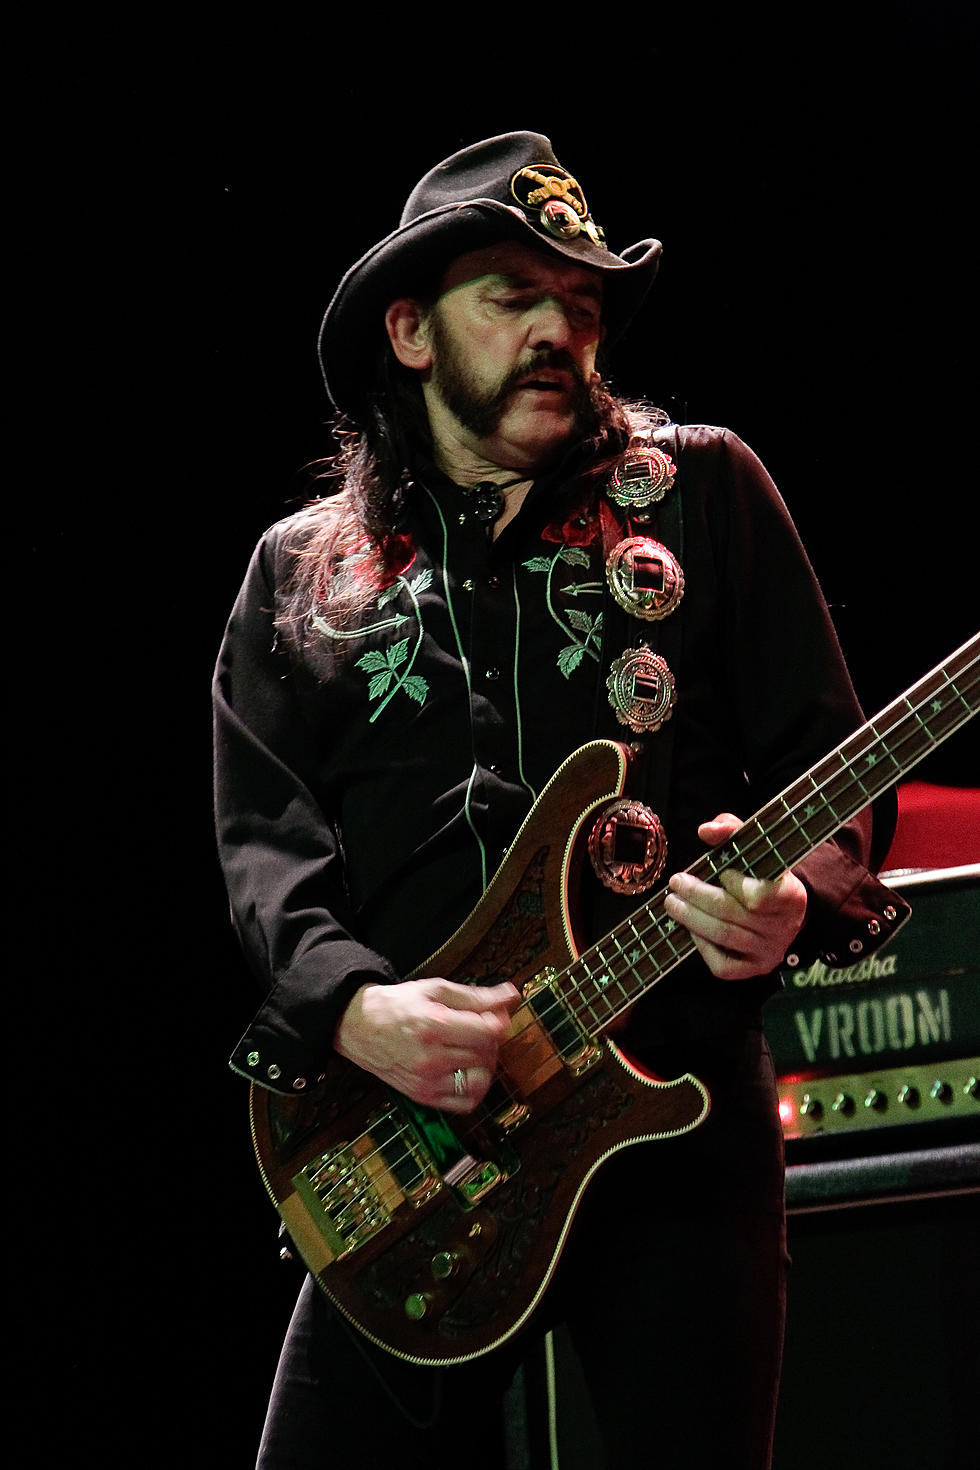 Motorhead’s “Ace Of Spades” Rewritten For A Beer Commercial [VIDEO]